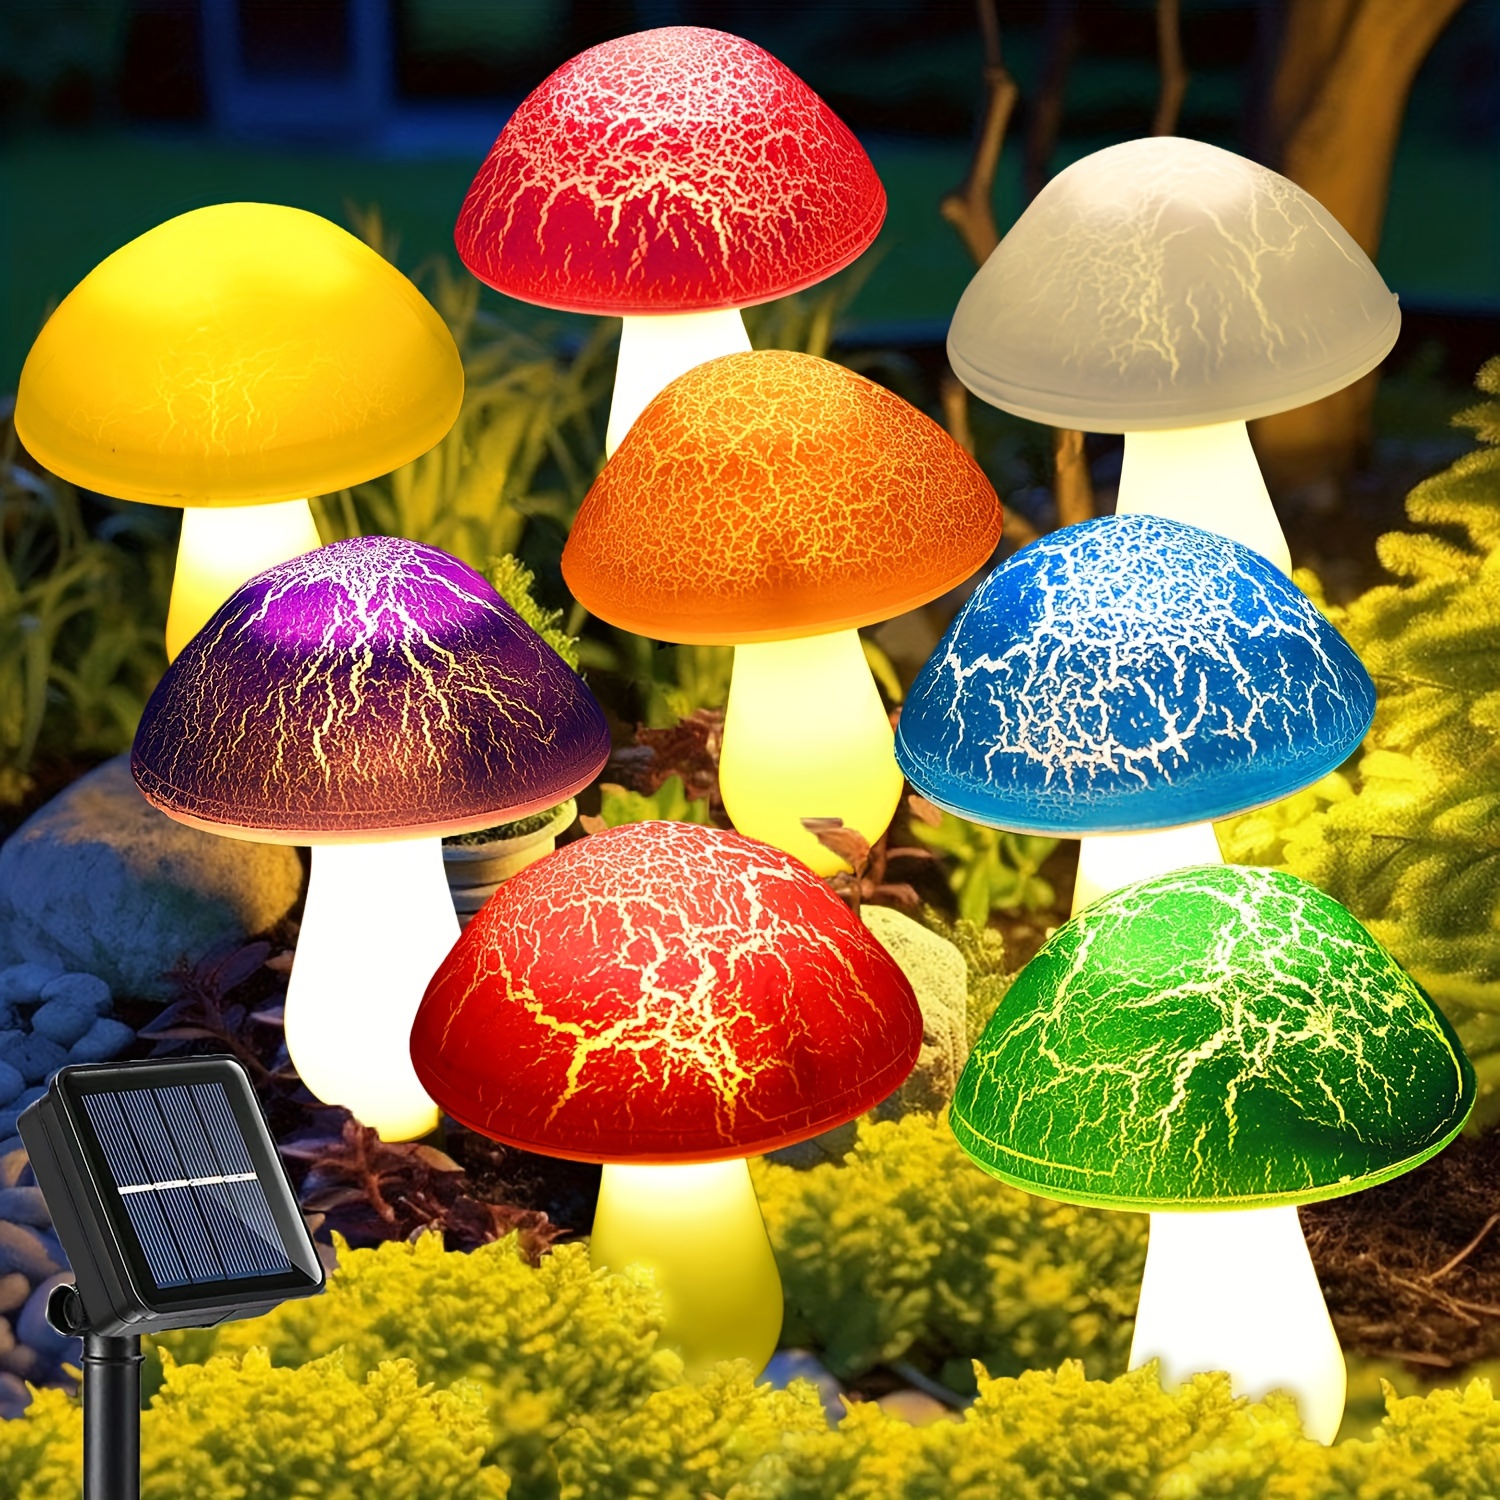 

Solar Powered Mushroom Lights, Outdoor Landscape Lighting, Colorful Garden Decorative Lights For Lawn And Yard, Durable Solar Panel Lawn Lamp With 8 Leds